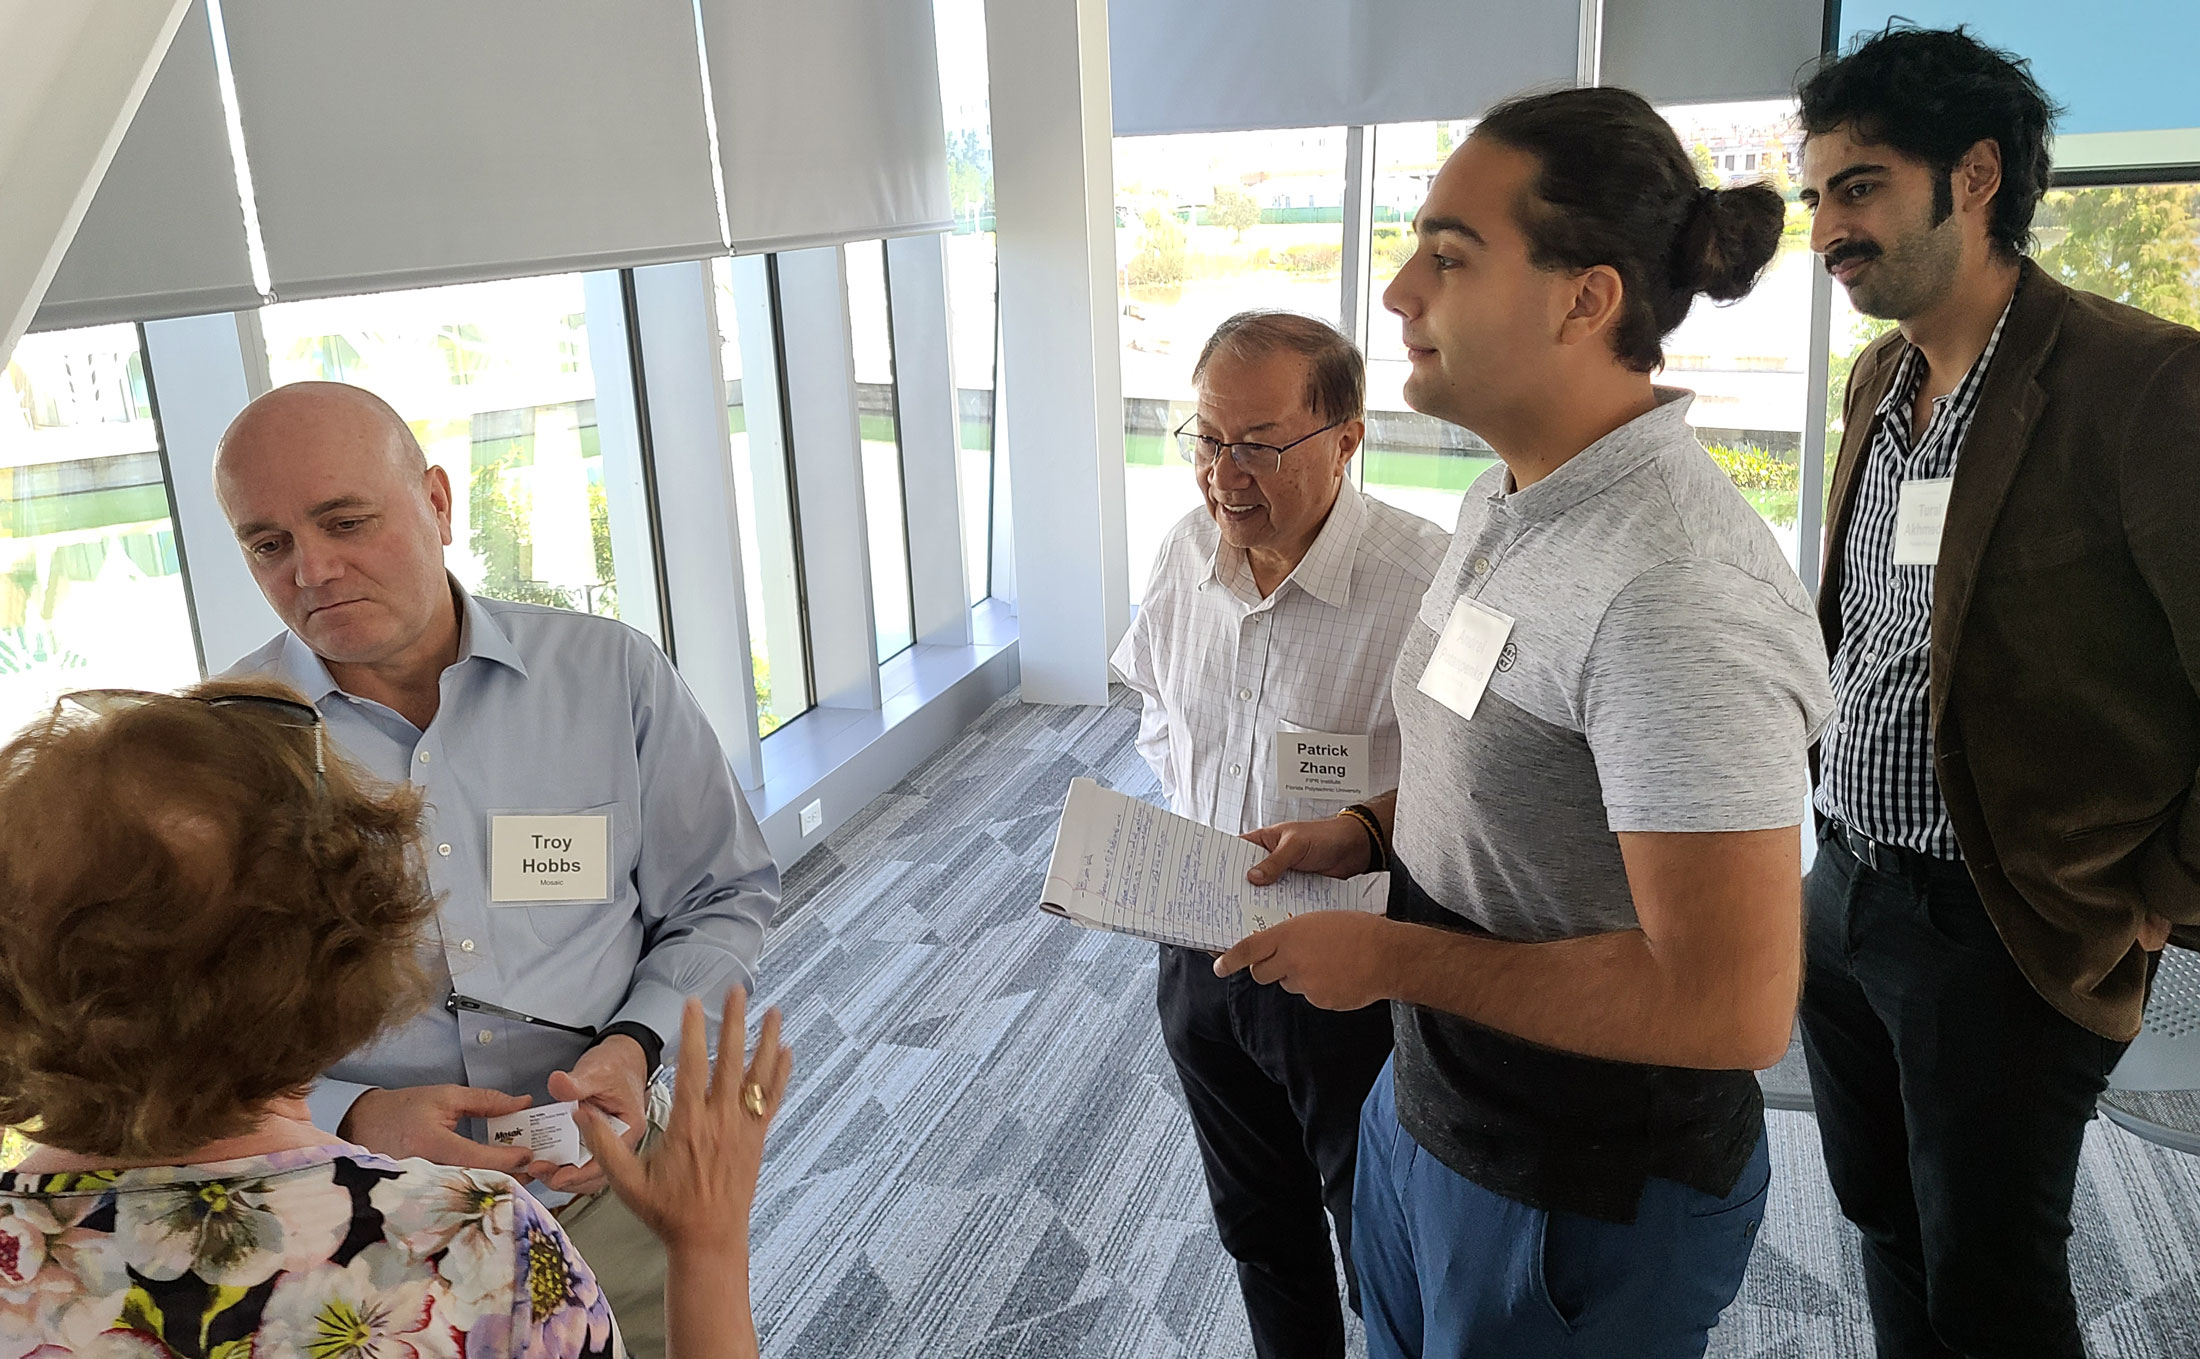 National workshop at Florida Poly unveils advances on rare earth element extraction